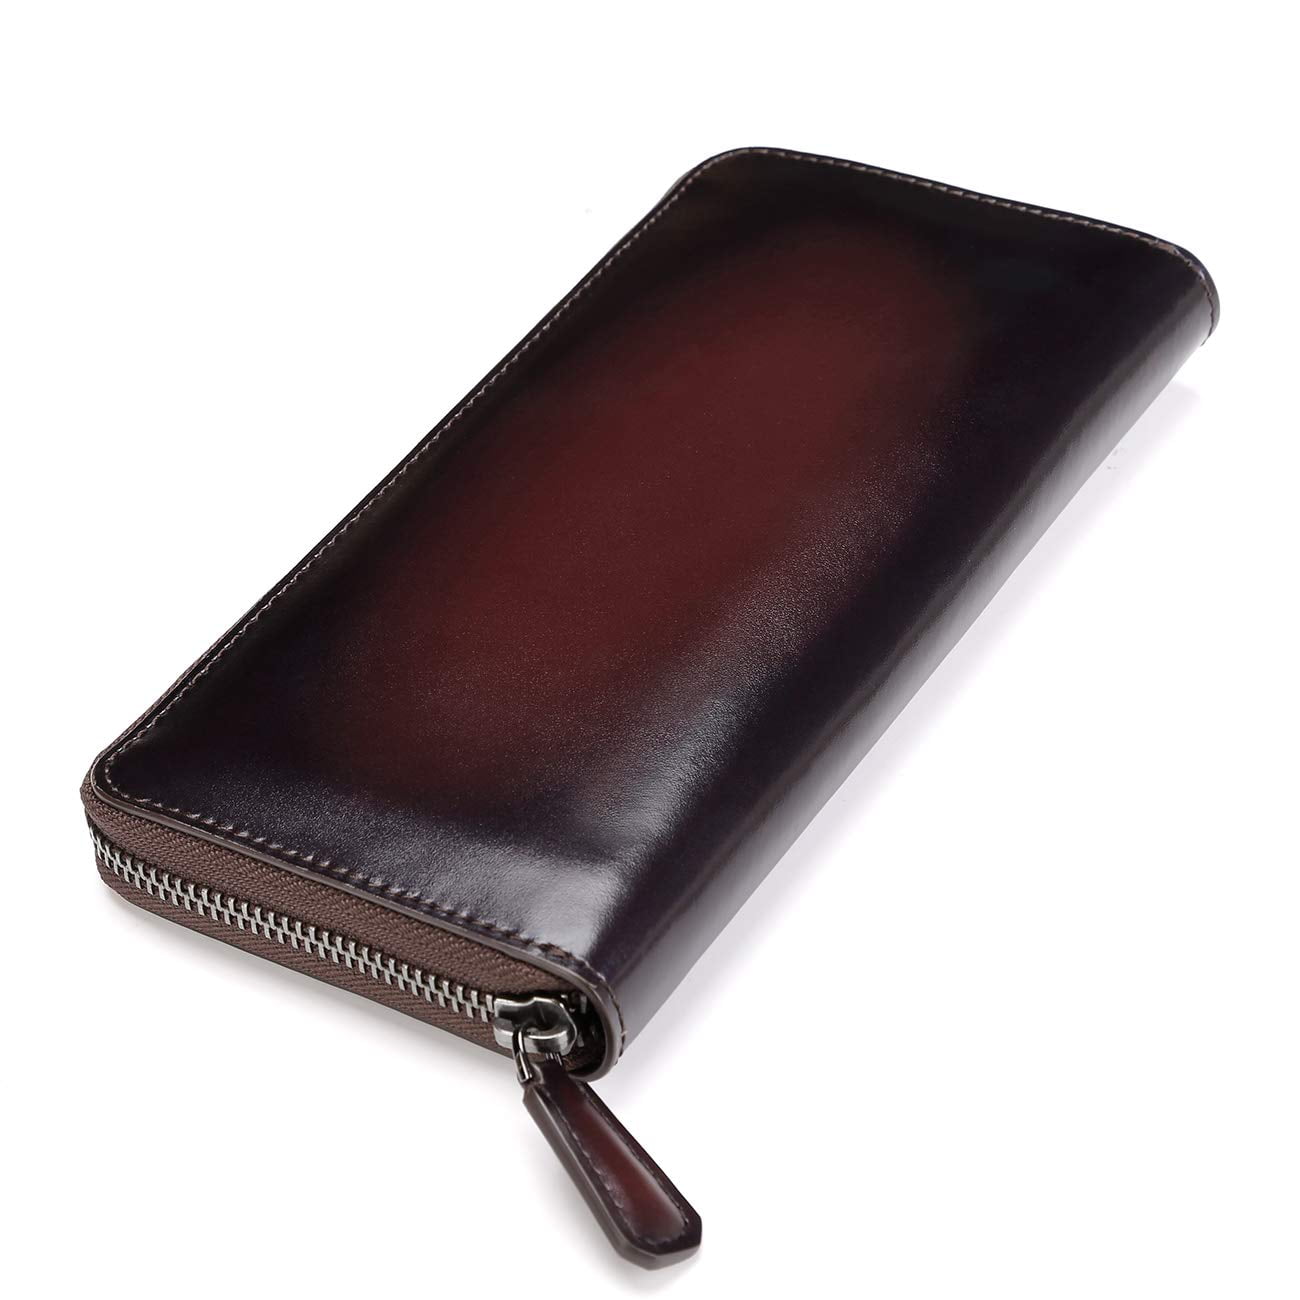 Italian Calfskin TERSE Mens Leather Wallet Clutch Purse Long Wallet Phone Case With Card Cash Holder 